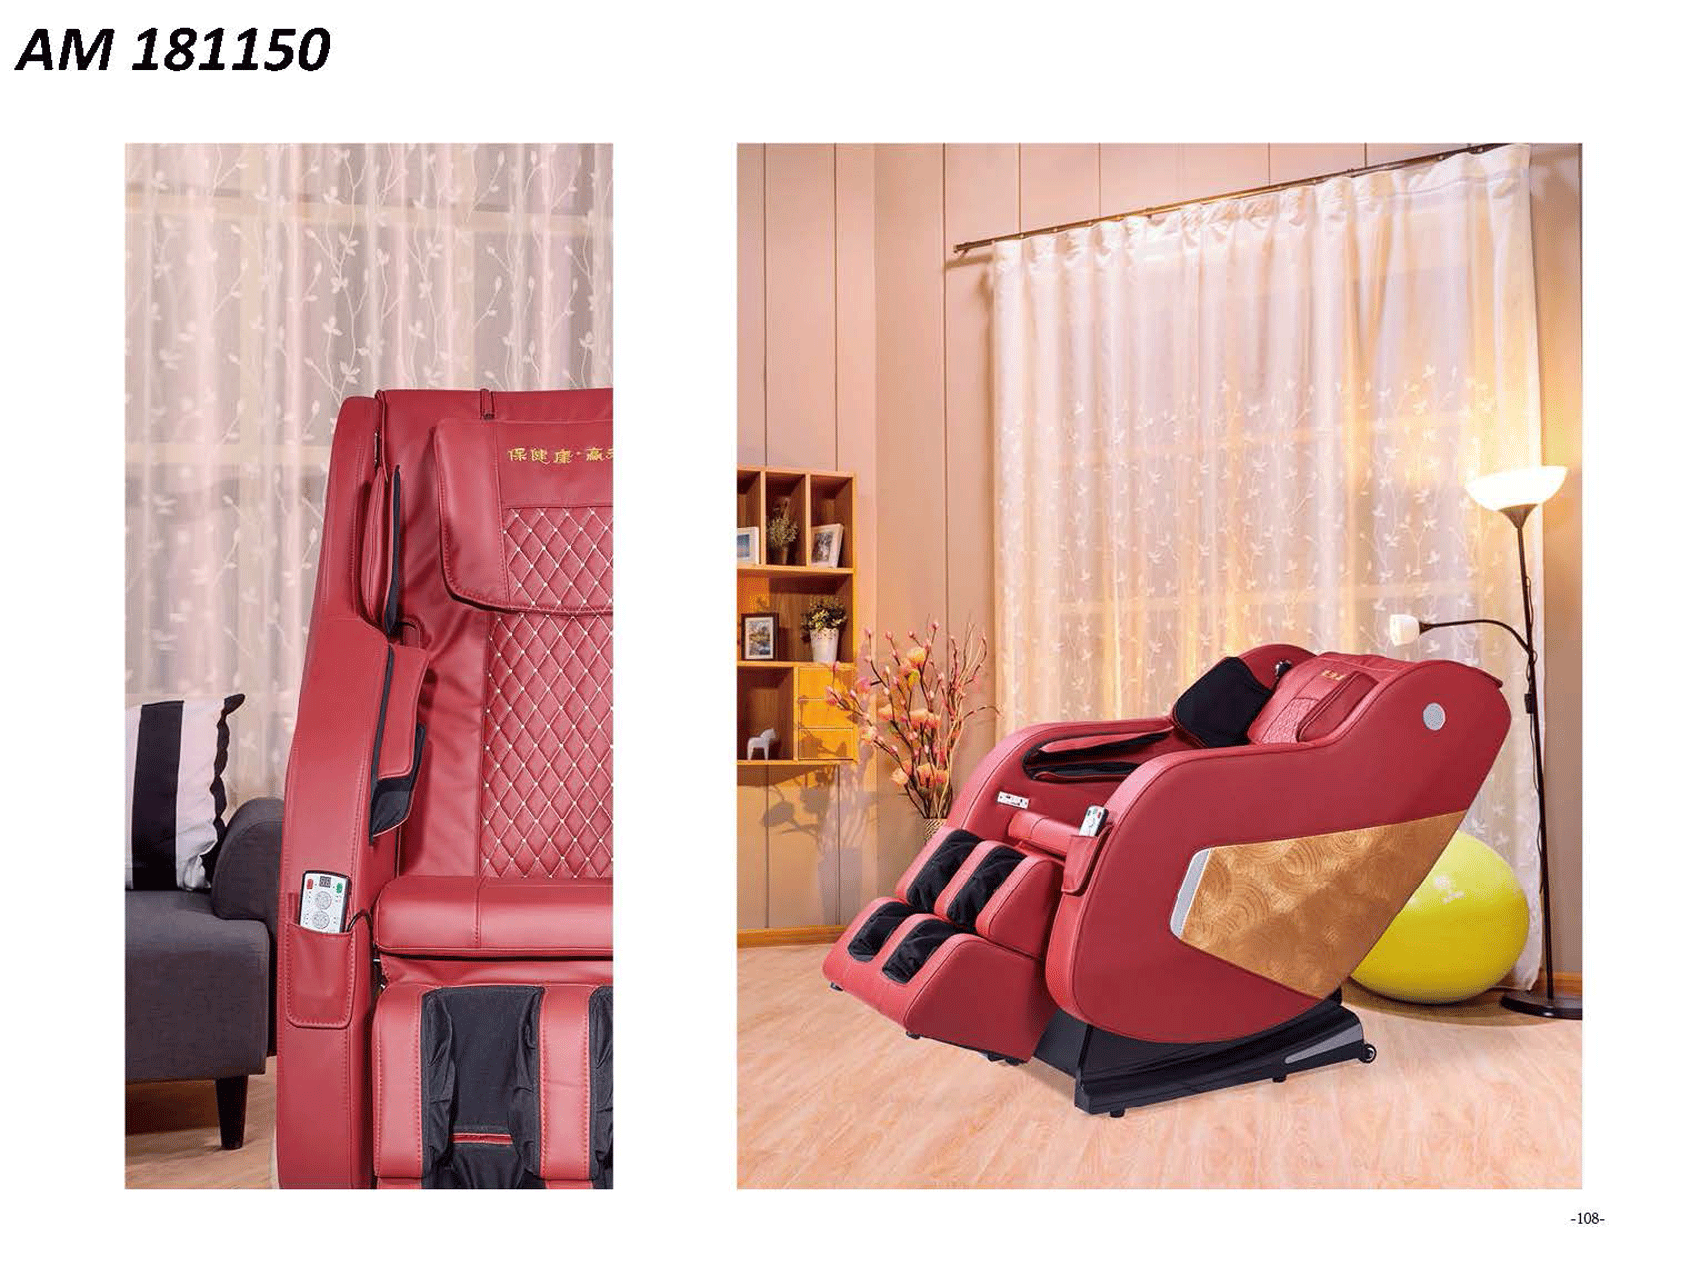 Living Room Furniture Sofas Loveseats and Chairs AM 181150 Massage Chair